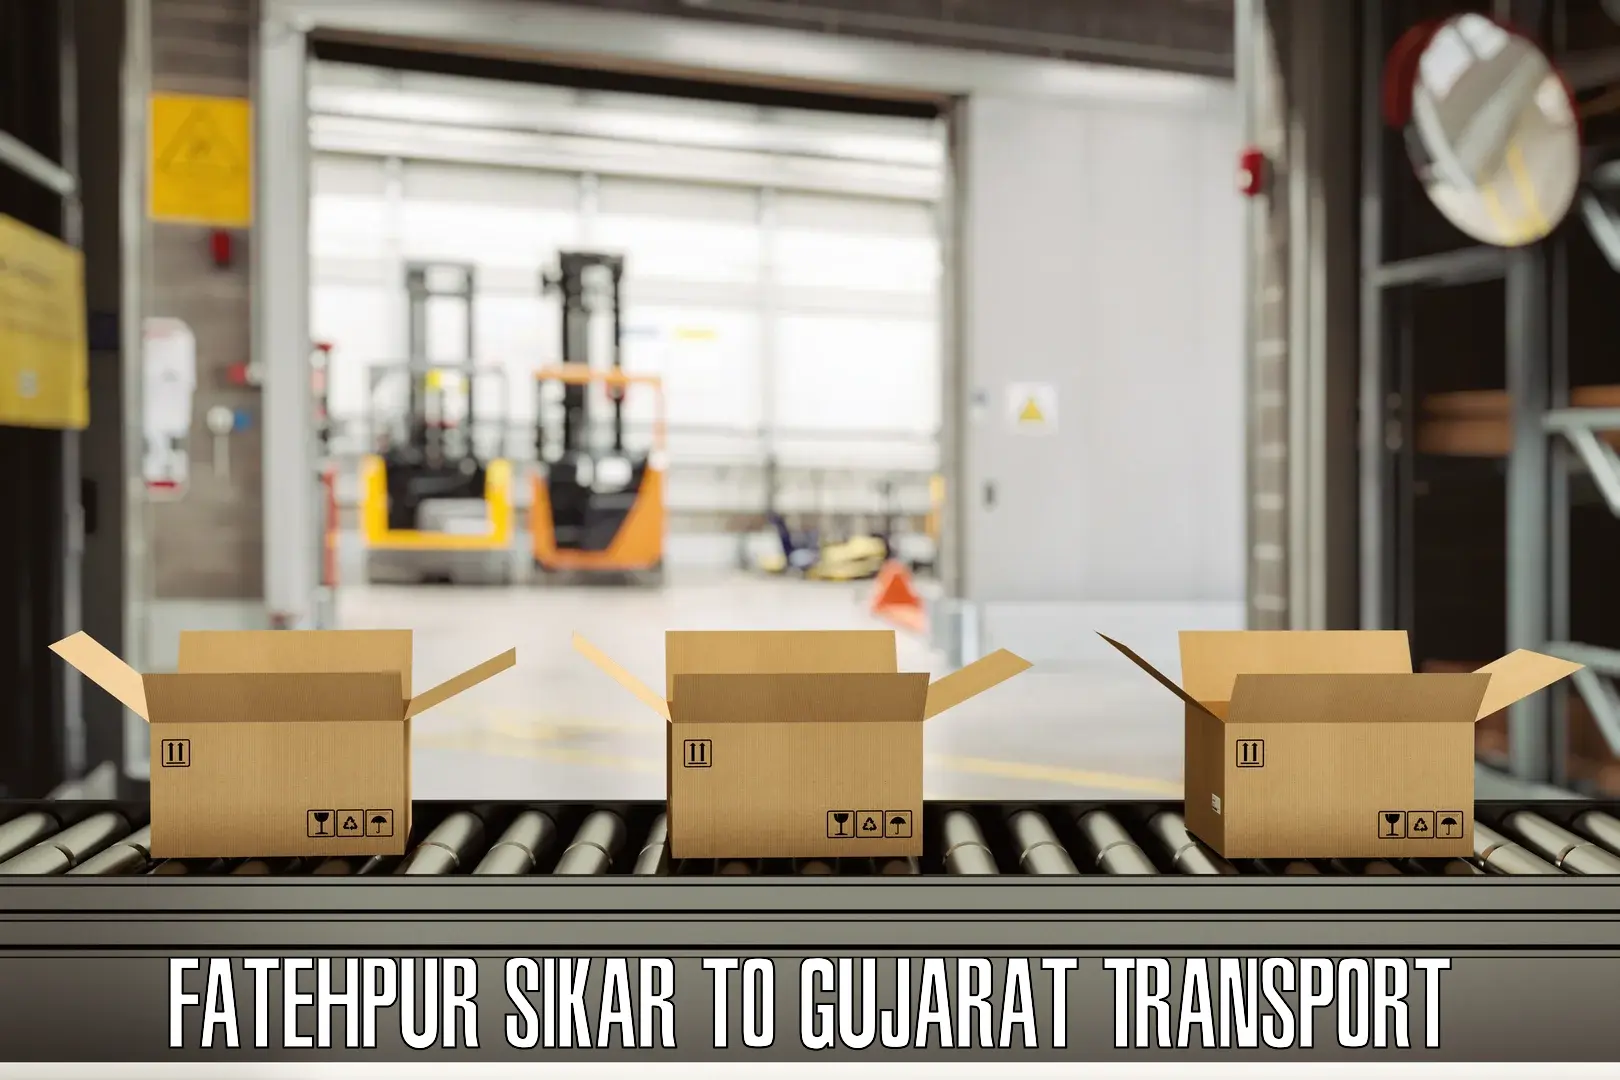 Transport shared services Fatehpur Sikar to Dholera